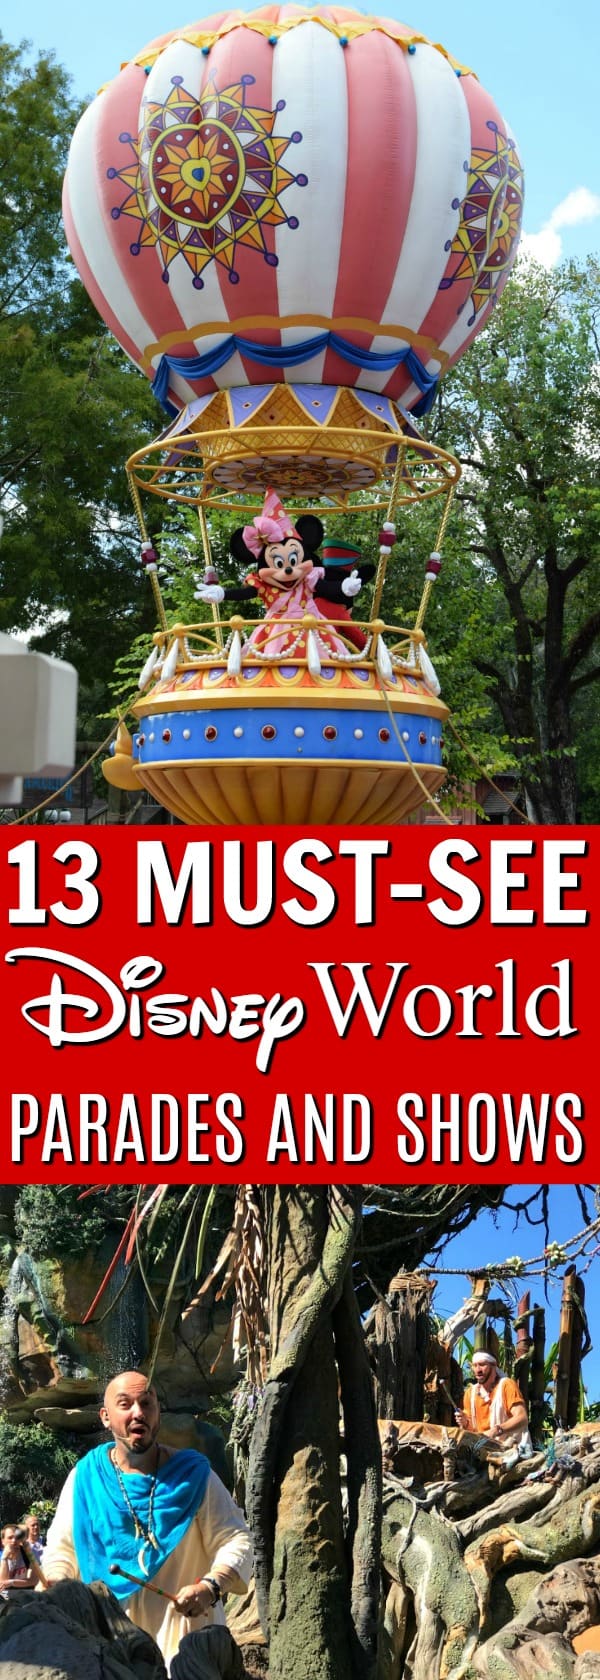 Ready for your next visit to Walt Disney World but not sure which parades and shows to check out? Her'es our 13 favorite must-see shows and parades at Disney World including locations, lengths, and times. 